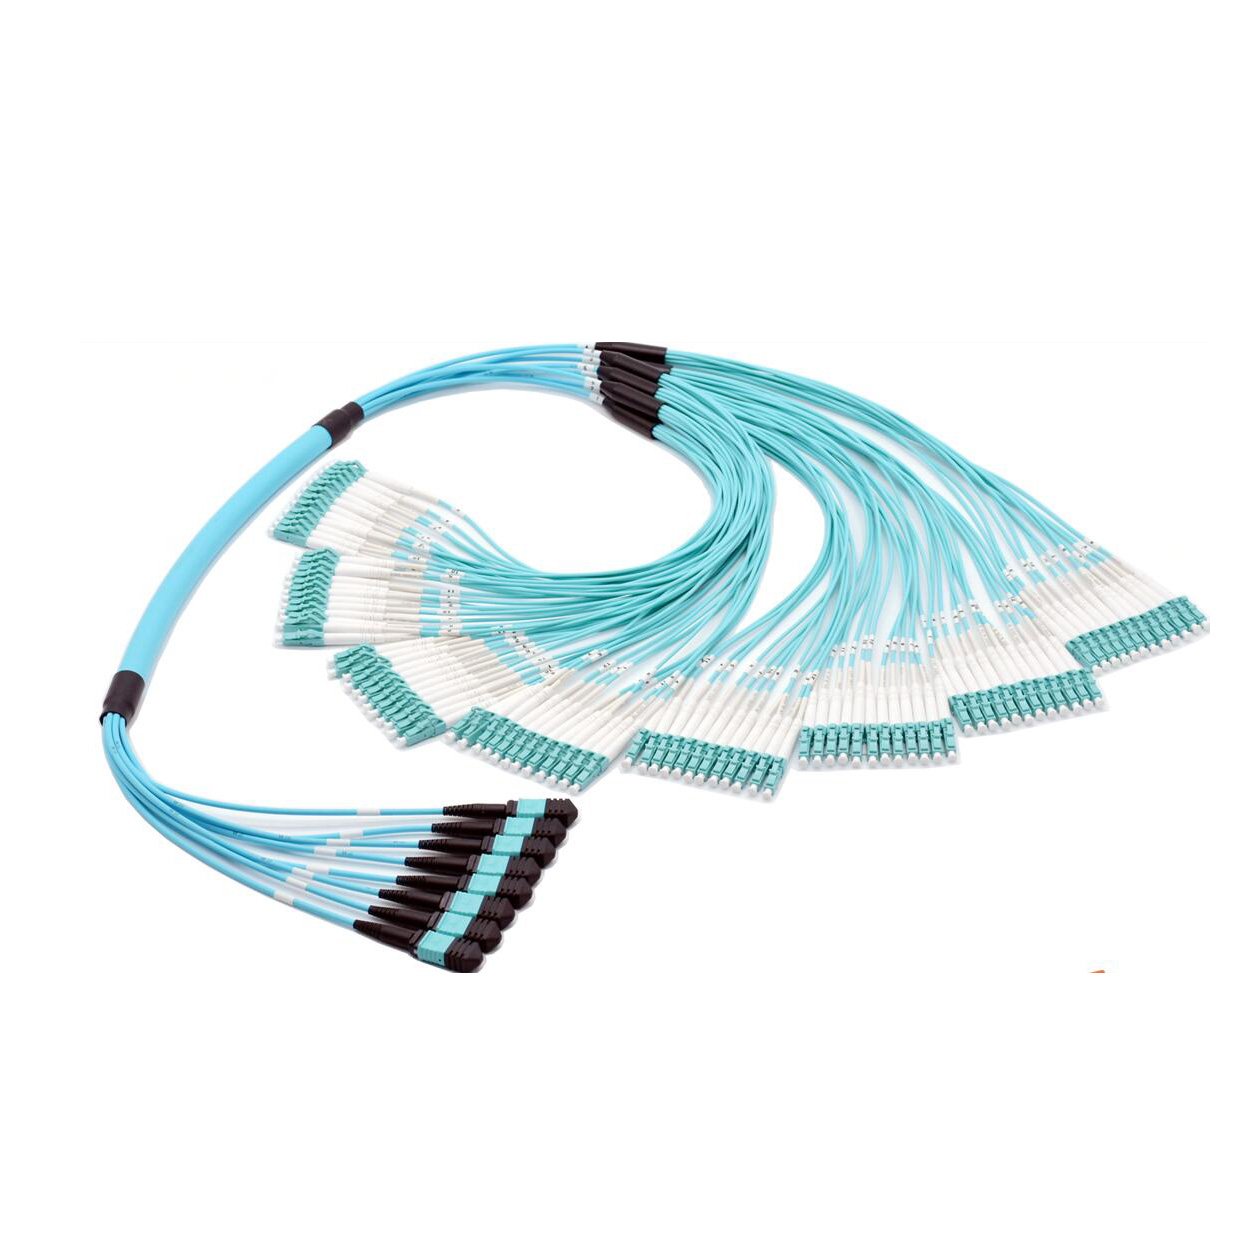 I-MPO / MTP Harness Patch Cord